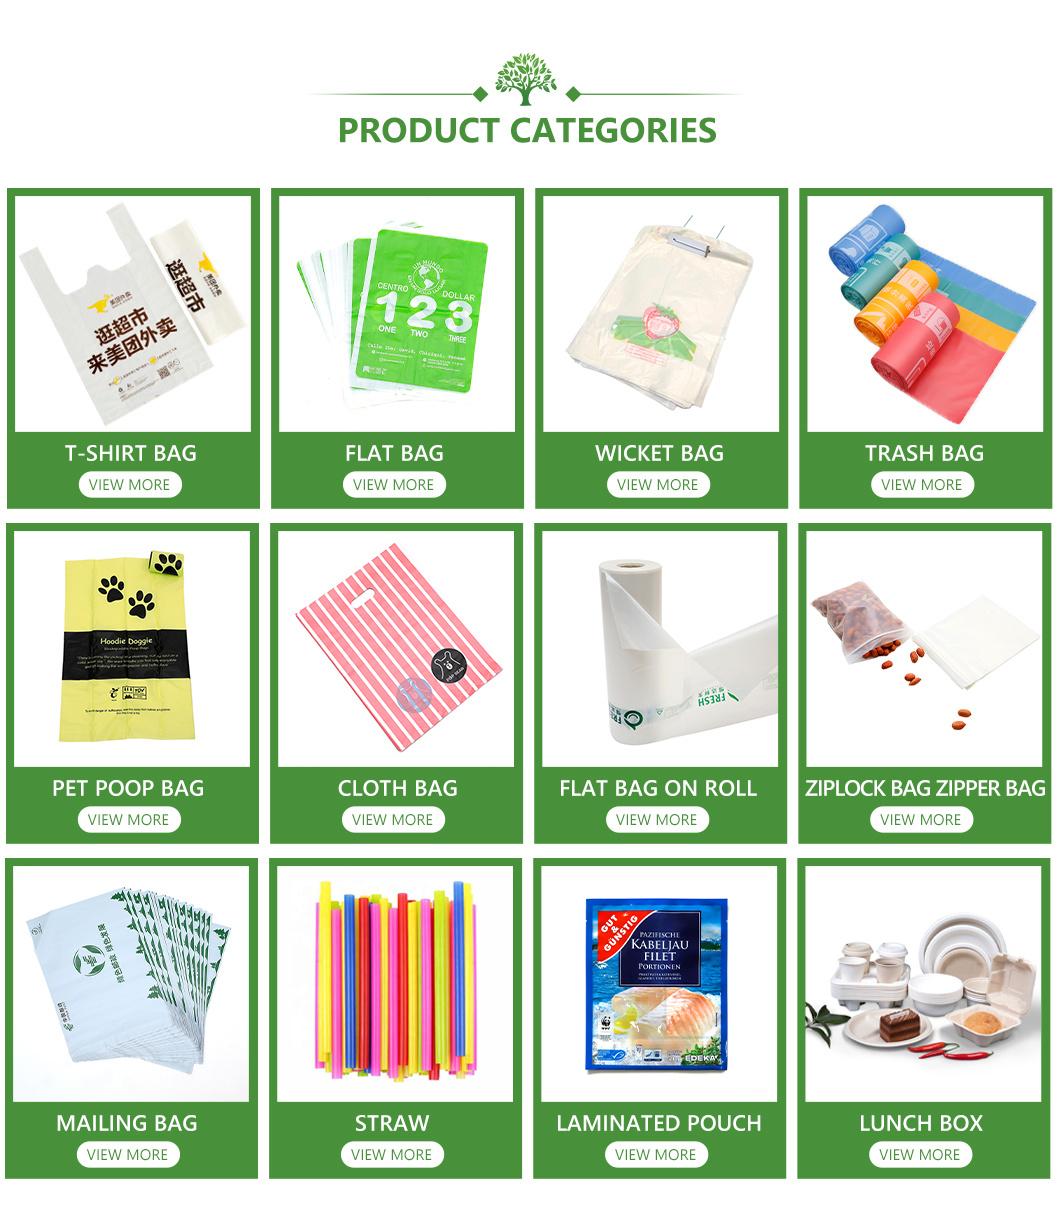 Custom Biodegradable Bags/T-Shirt/Shopping Bags/Supermarket Bags/on a Roller/Take-out/Packaging/Envelope/Trush/Garbage Bags Manufacturer with FDA and Print Logo